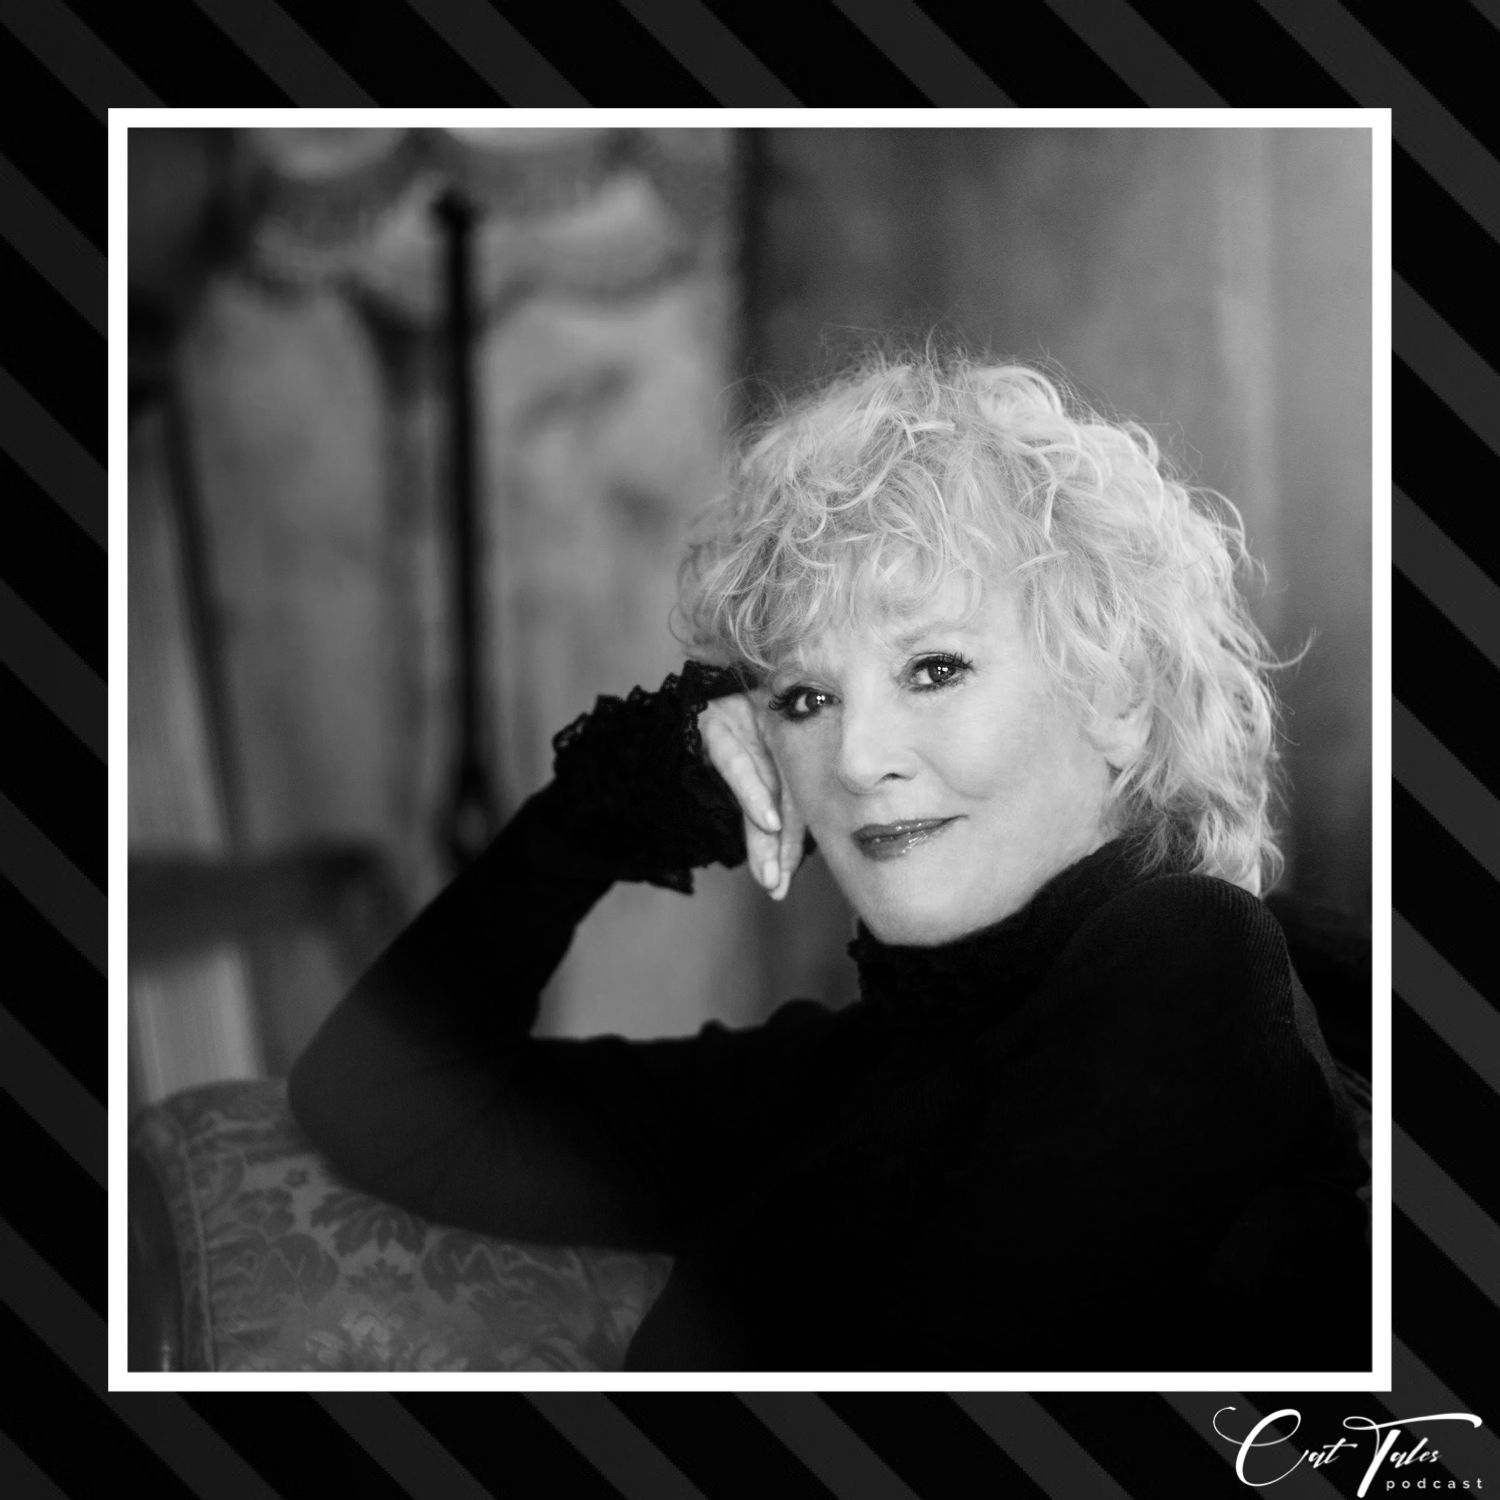 95: The one with Petula Clark Image